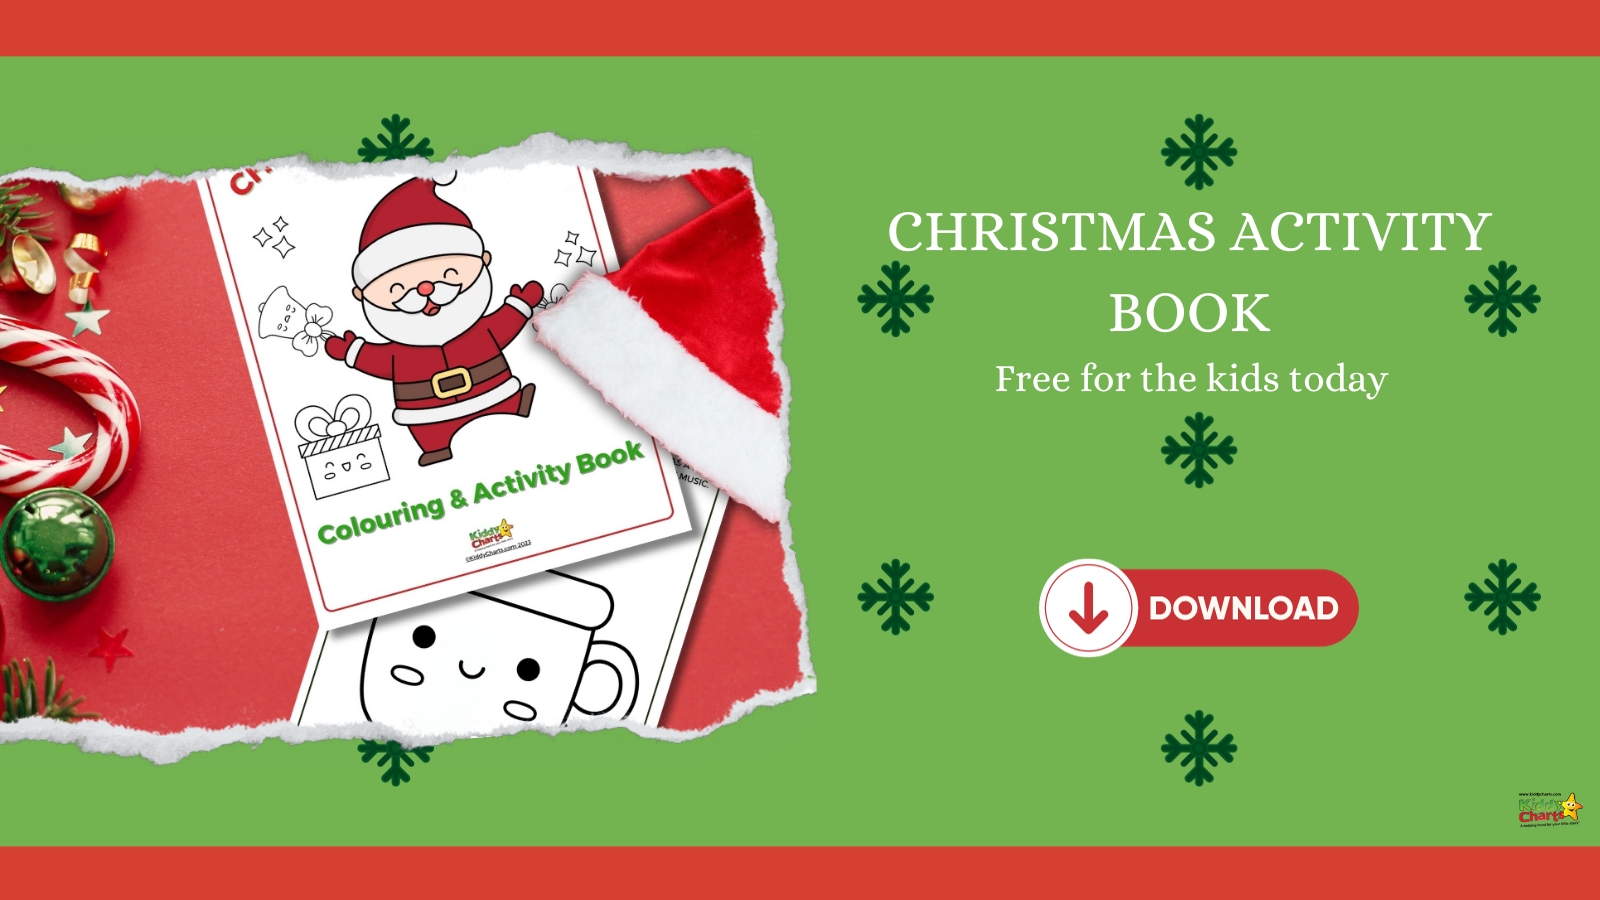 Free Christmas activity book: With a mental health theme